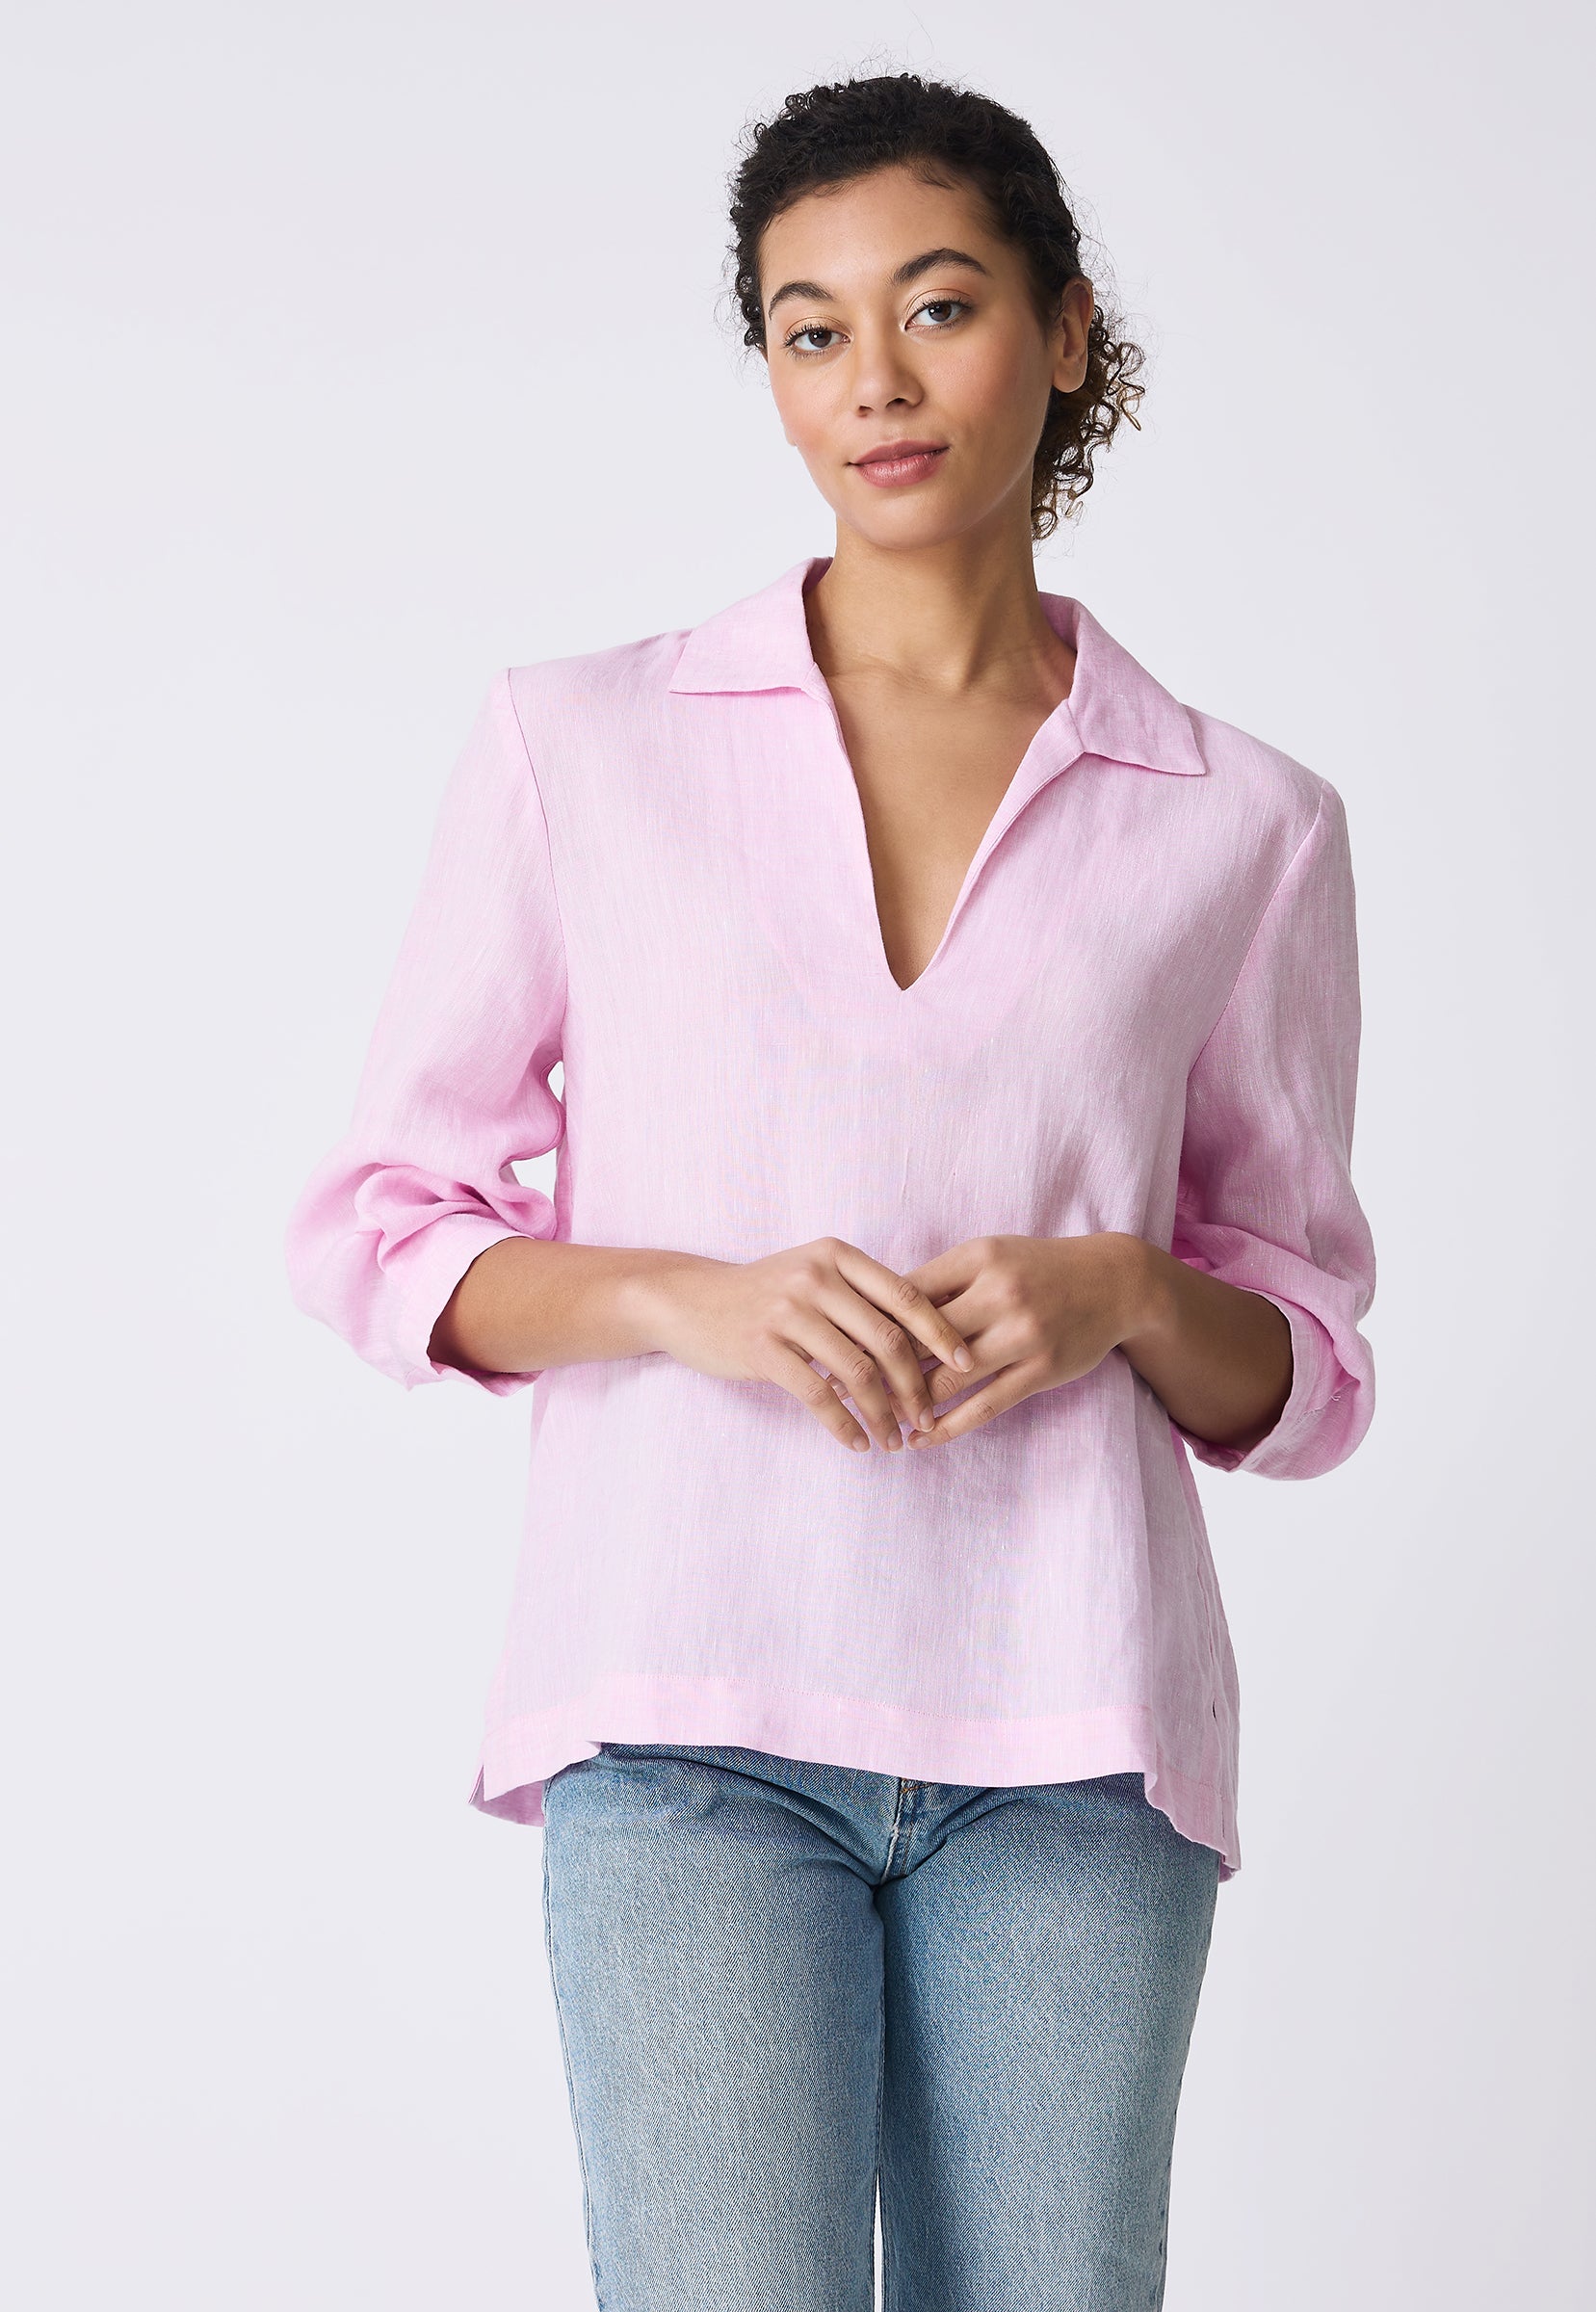 Kal Rieman Lea Collared V-Neck Top in Pink on model with hands in front of body front view